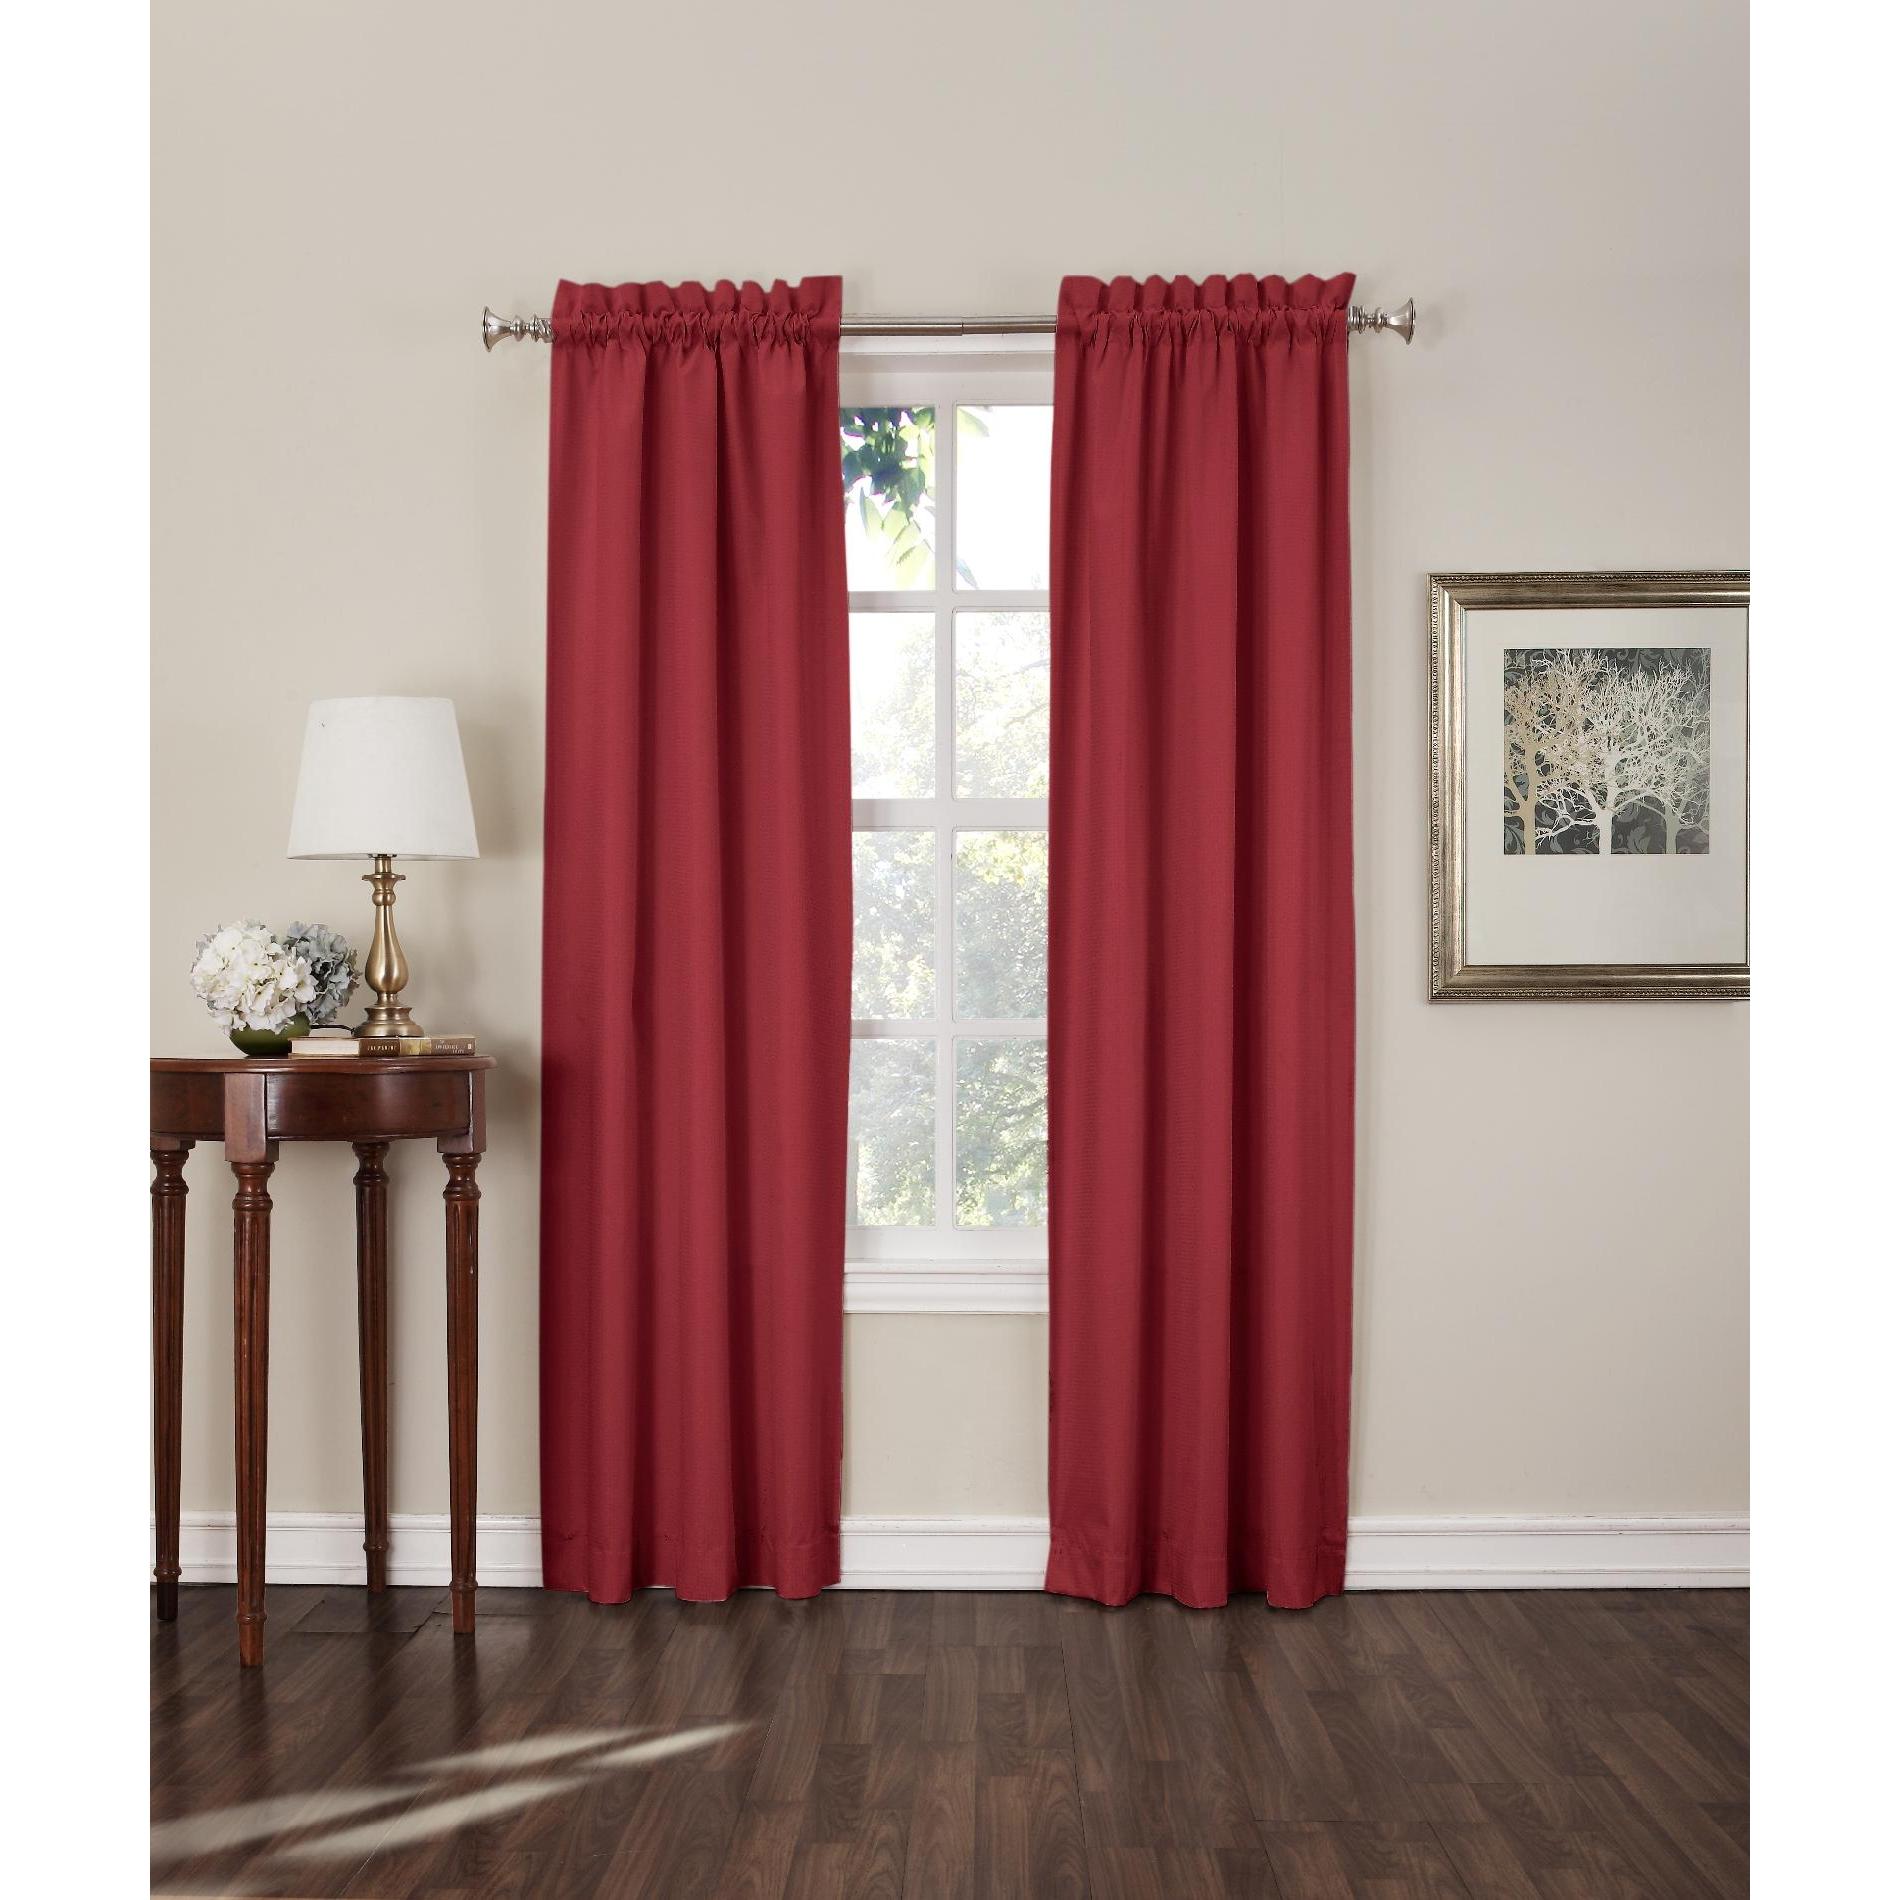 Shawn 2-Pack Blackout Curtain Panels Red